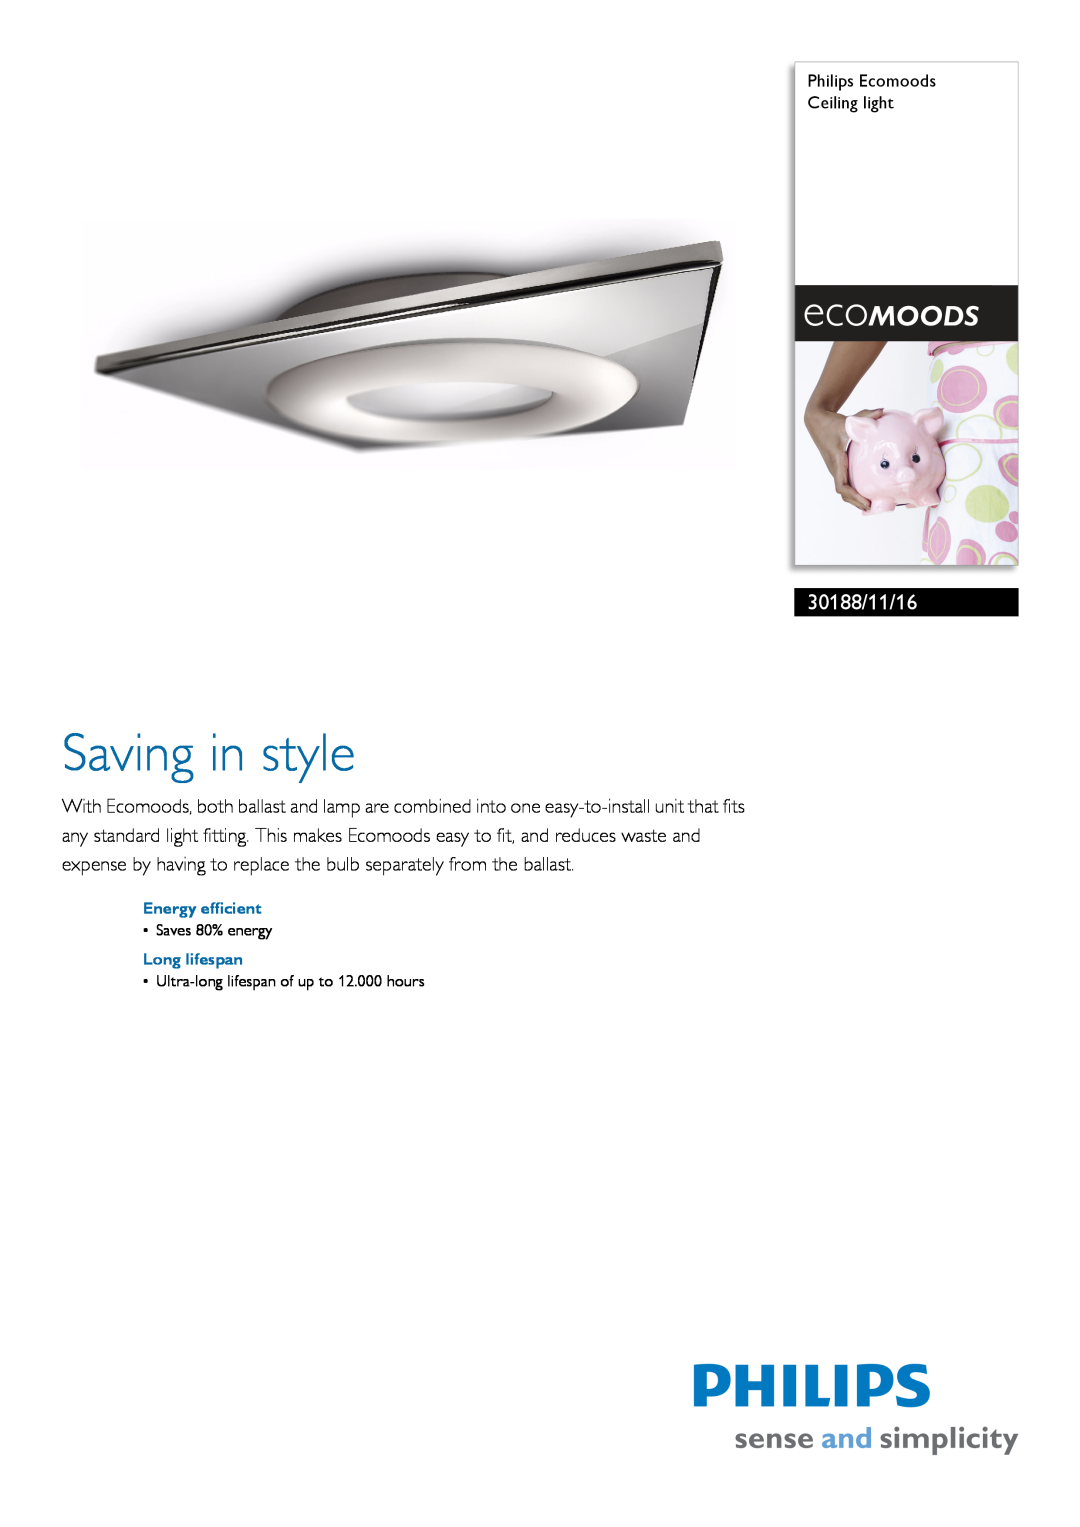 Philips 30188/11/16 manual Philips Ecomoods Ceiling light, Energy efficient, Long lifespan, Saving in style 